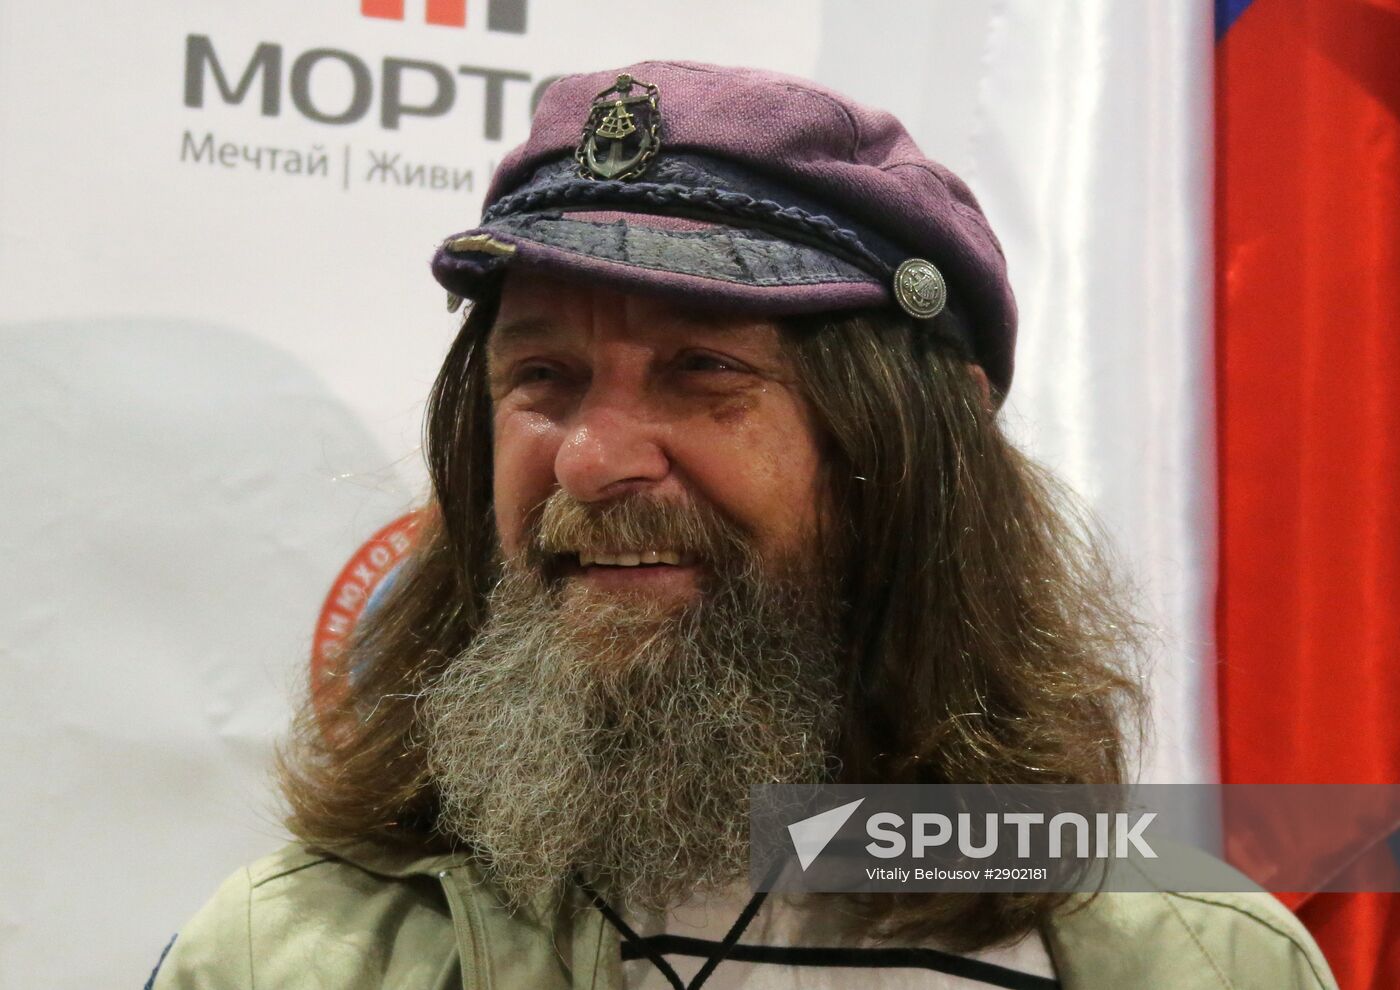 Fyodor Konyukhov welcomed after his record hot-air balloon round-the-world flight